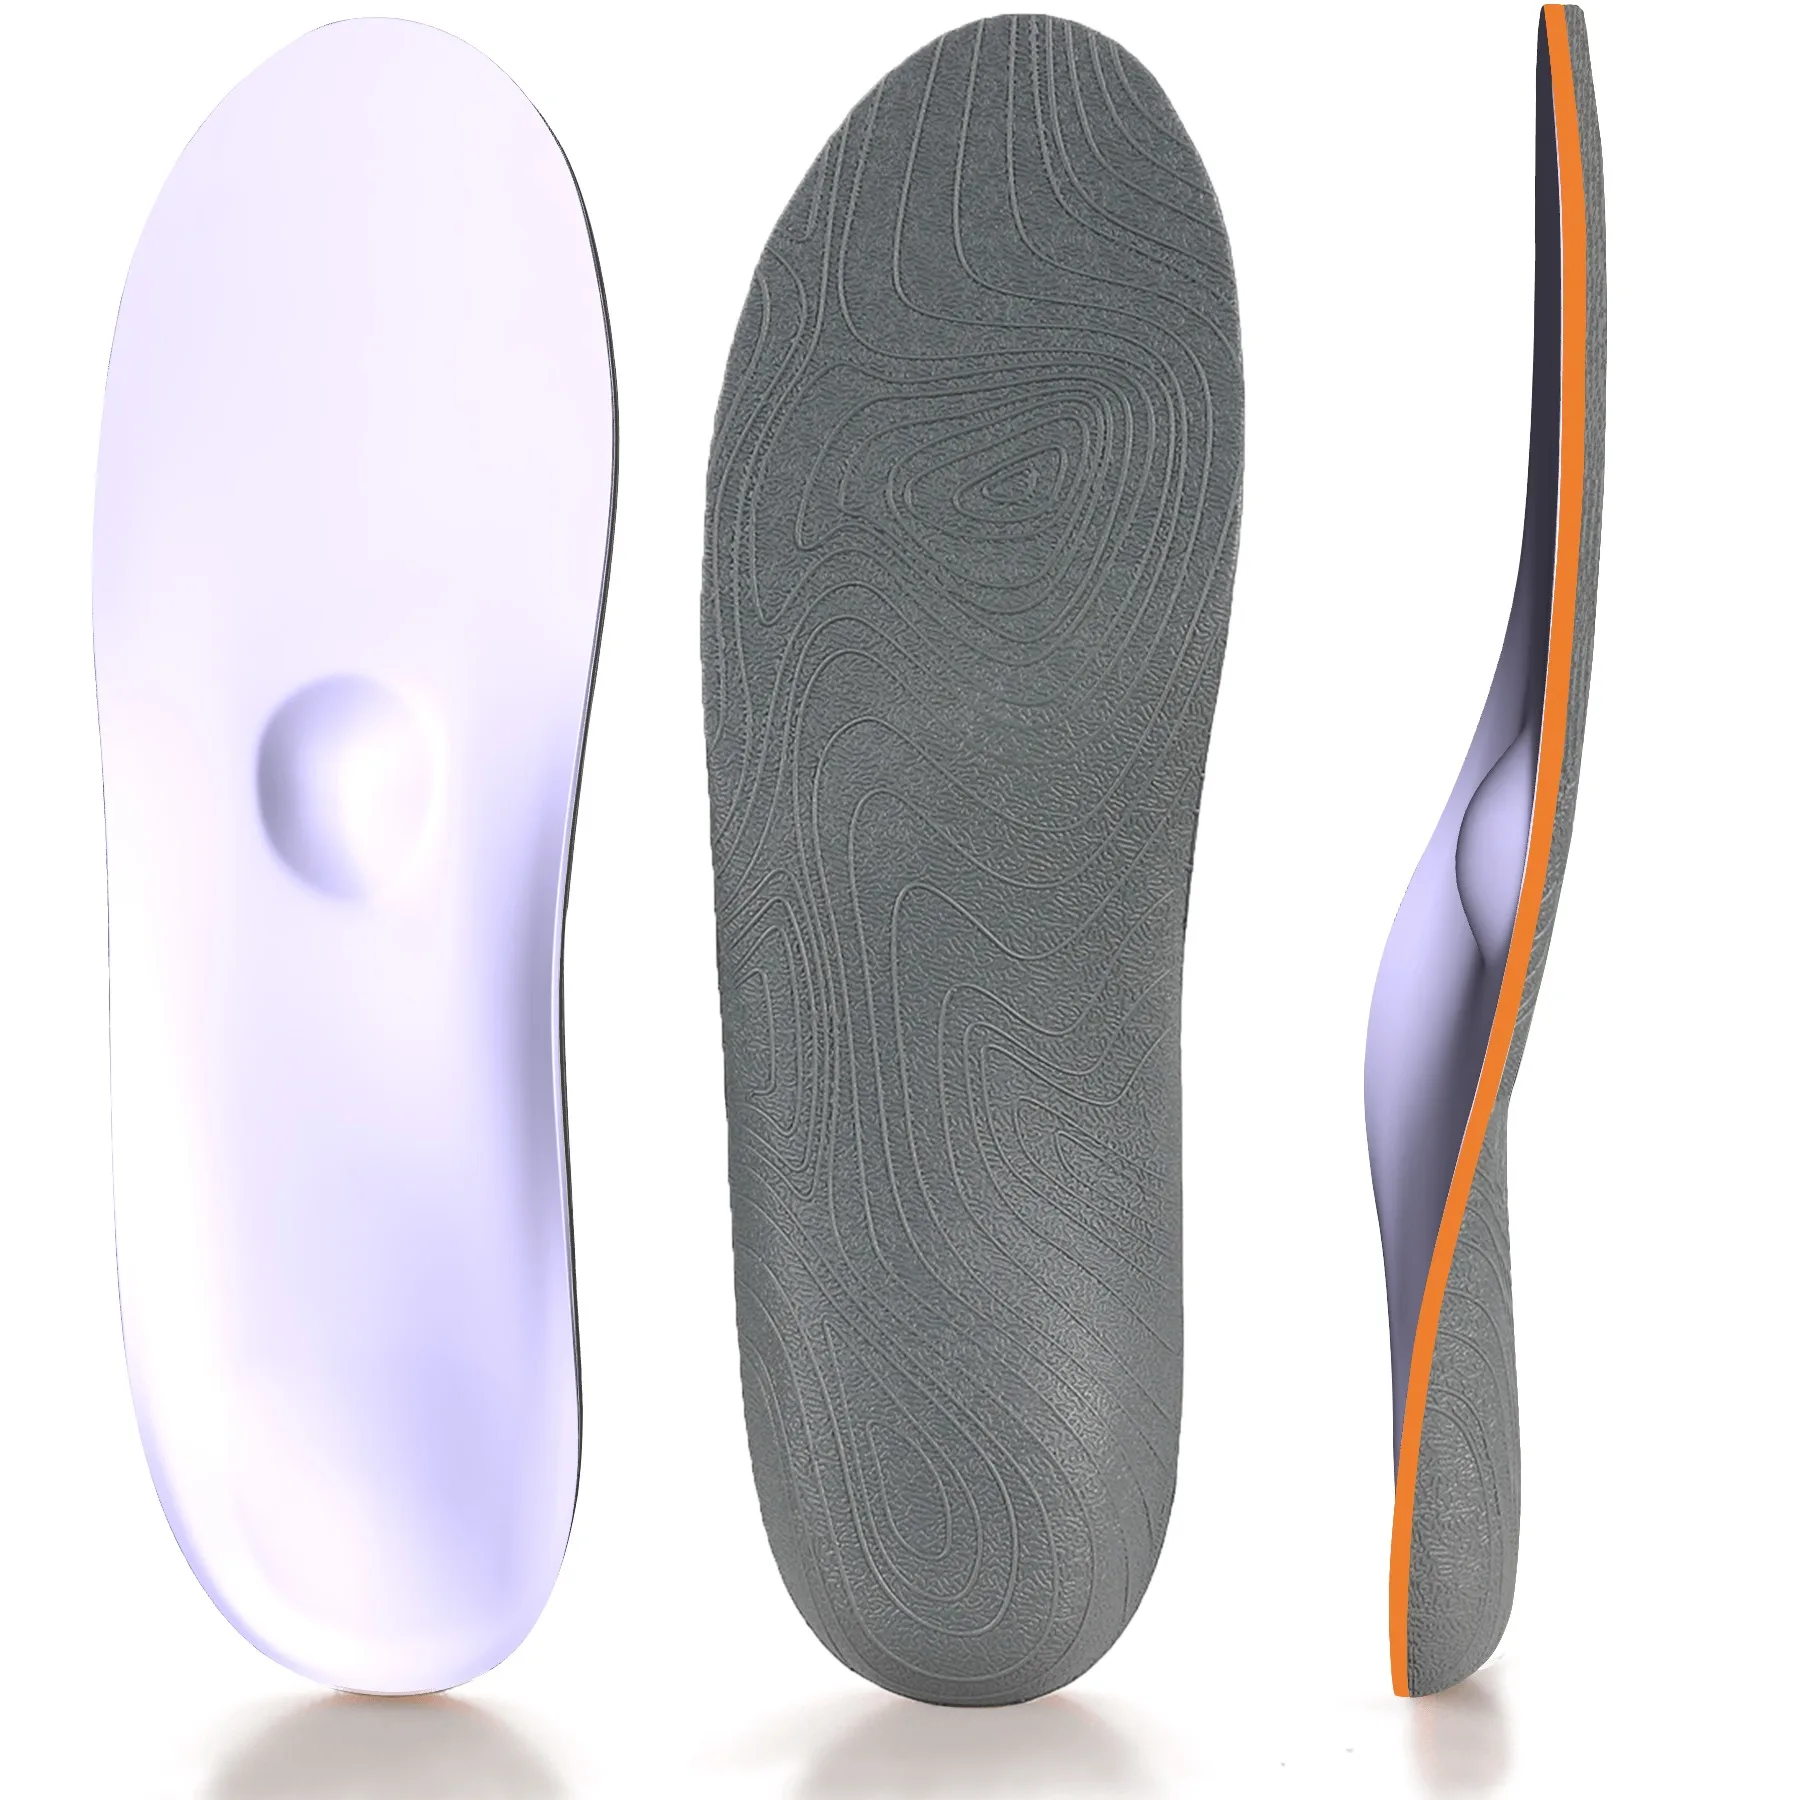 Flat Feet Insoles Orthotic Arch Support Sole Insert Orthopedic Insoles Heel Pain Plantar Fasciitis Men Woman Shoes